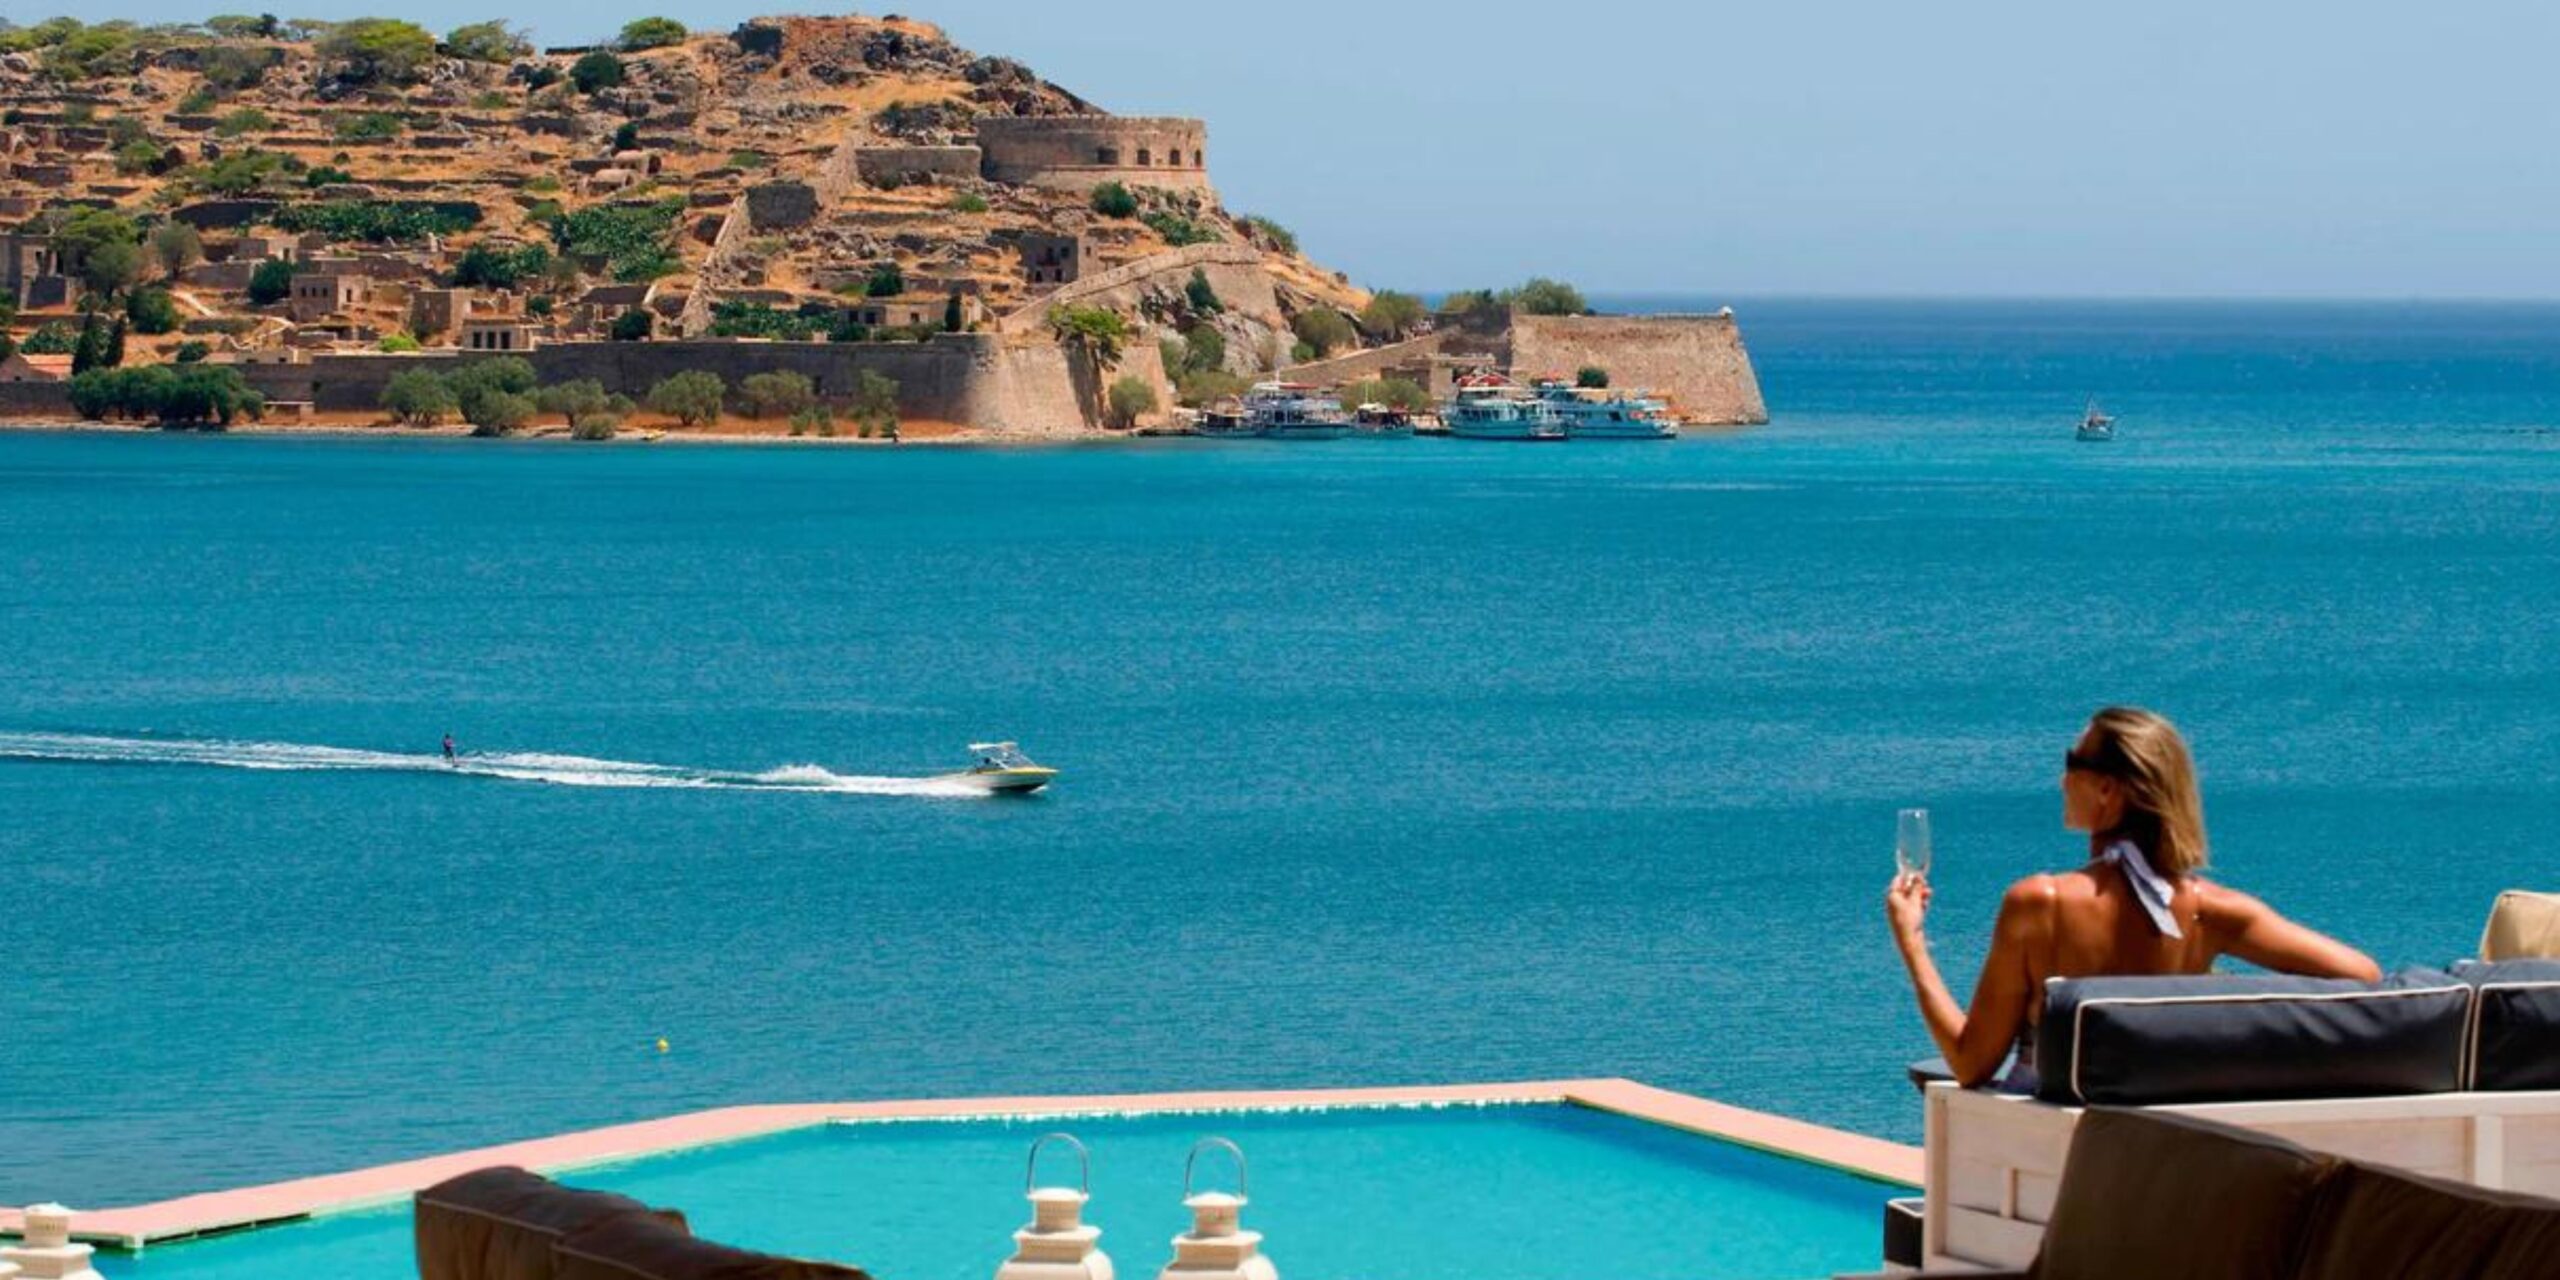 View from a poolside overlooking the sea, with a person relaxing on a lounger, speedboats in the water, and historic ruins on the hillside in the distance.